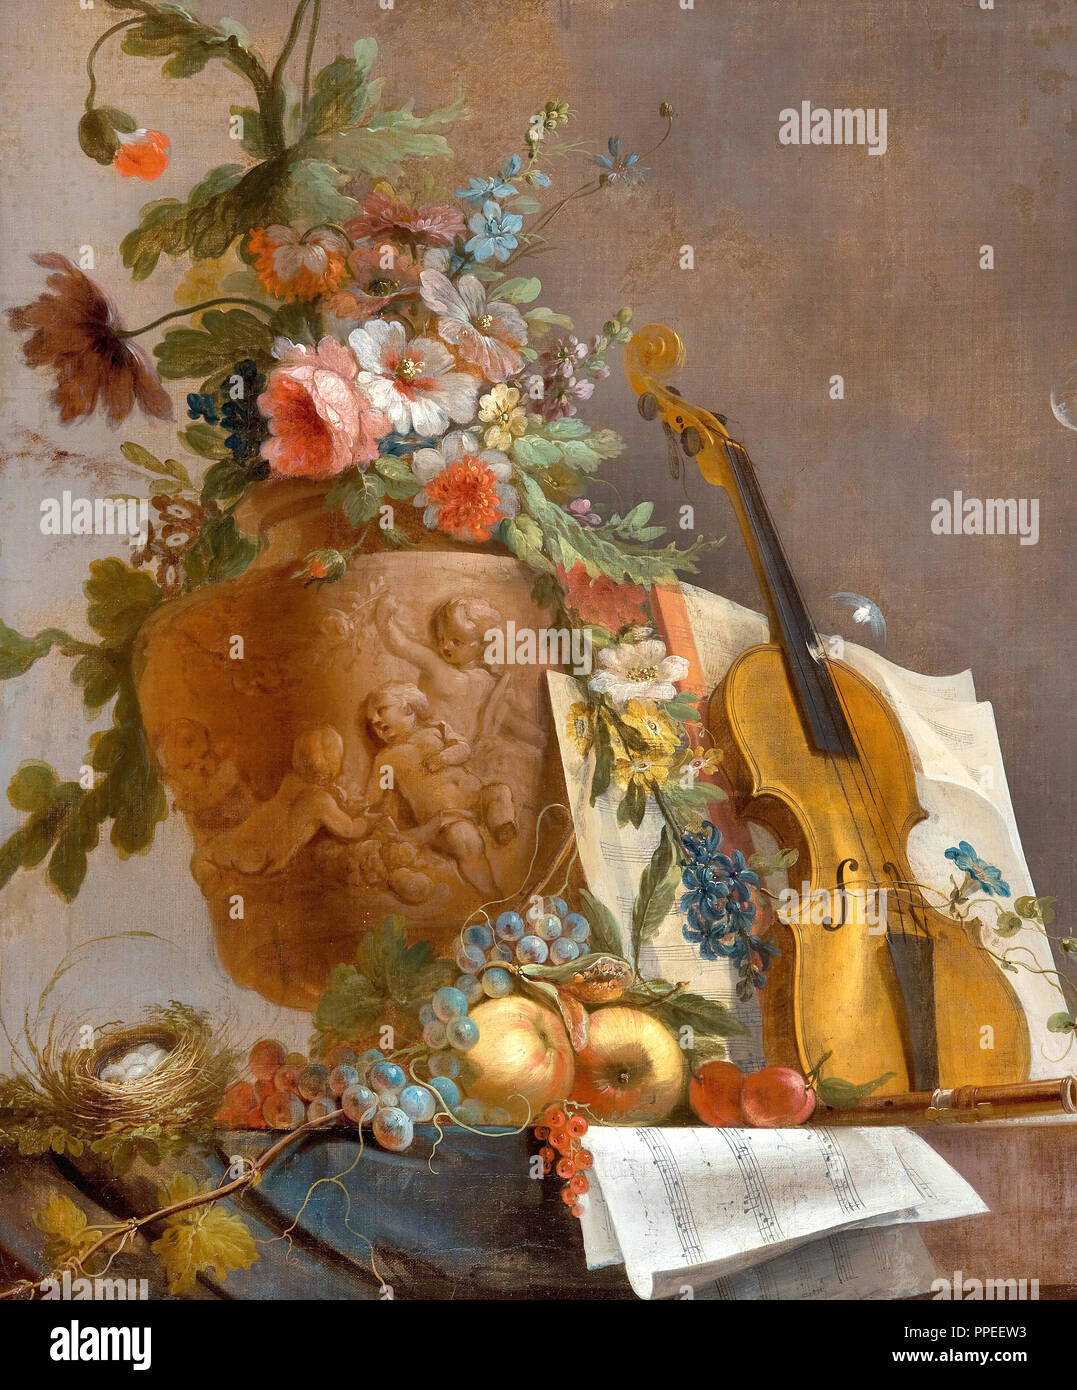 Jean-Jacques Bachelier, Still Life with Flowers and a Violin. Circa 1750. Oil on canvas. Art Gallery of South Australia, North Terrace, Australia. Stock Photo